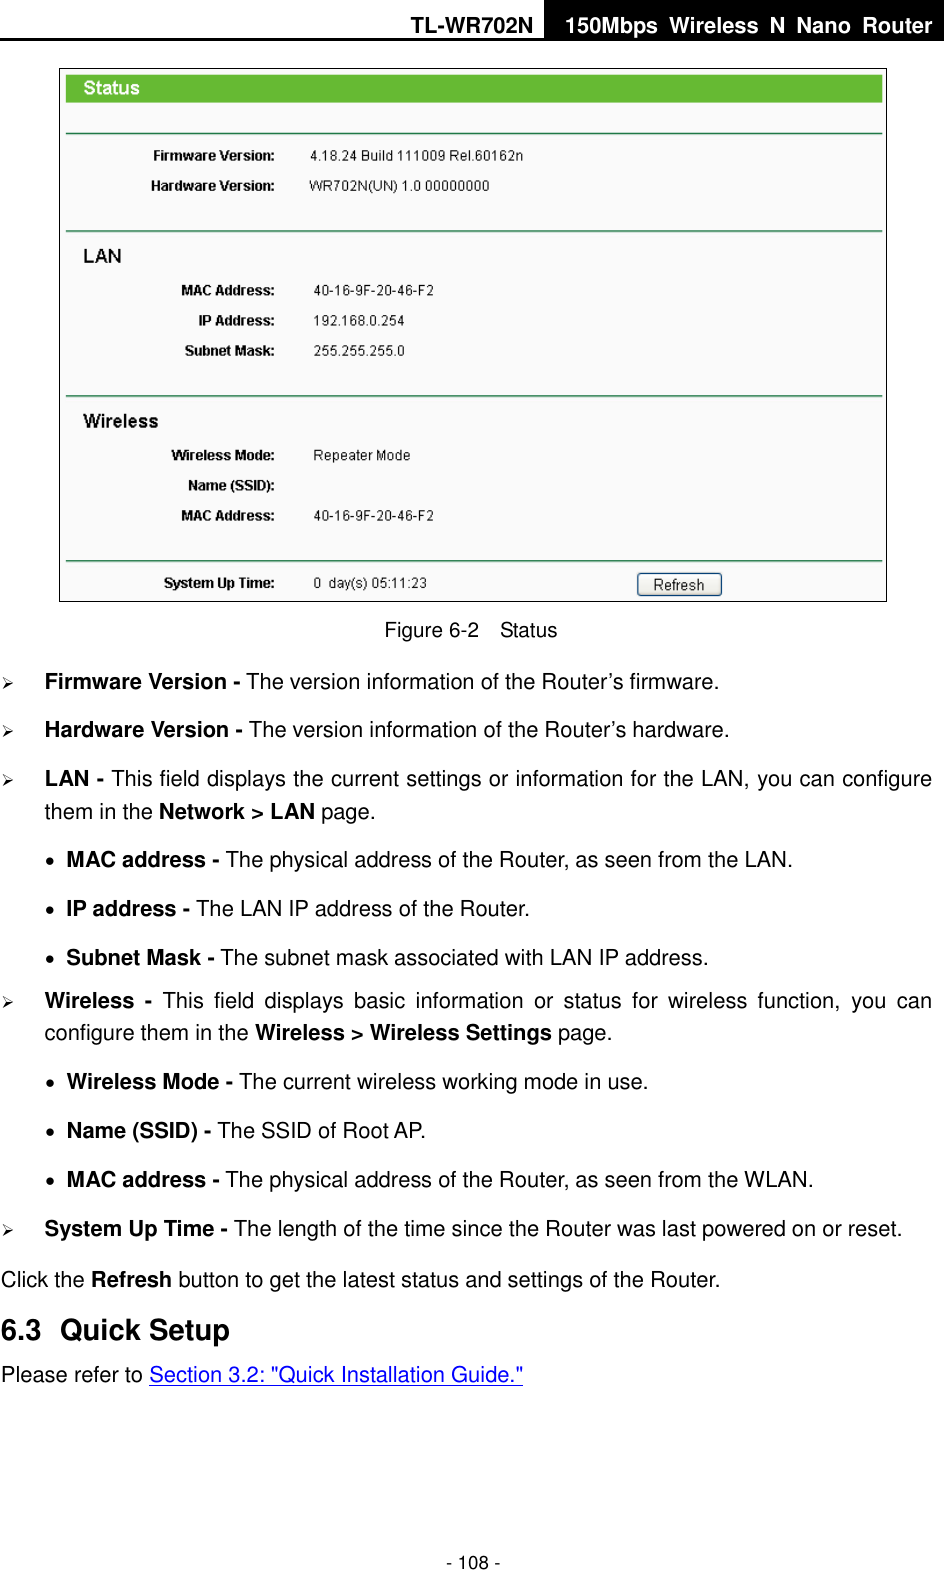 TL-WR702N 150Mbps  Wireless  N  Nano  Router  - 108 -  Figure 6-2  Status  Firmware Version - The version information of the Router’s firmware.  Hardware Version - The version information of the Router’s hardware.  LAN - This field displays the current settings or information for the LAN, you can configure them in the Network &gt; LAN page.    MAC address - The physical address of the Router, as seen from the LAN.  IP address - The LAN IP address of the Router.  Subnet Mask - The subnet mask associated with LAN IP address.  Wireless -  This  field  displays  basic  information  or  status  for  wireless  function,  you  can configure them in the Wireless &gt; Wireless Settings page.    Wireless Mode - The current wireless working mode in use.  Name (SSID) - The SSID of Root AP.  MAC address - The physical address of the Router, as seen from the WLAN.  System Up Time - The length of the time since the Router was last powered on or reset. Click the Refresh button to get the latest status and settings of the Router. 6.3  Quick Setup Please refer to Section 3.2: &quot;Quick Installation Guide.&quot; 